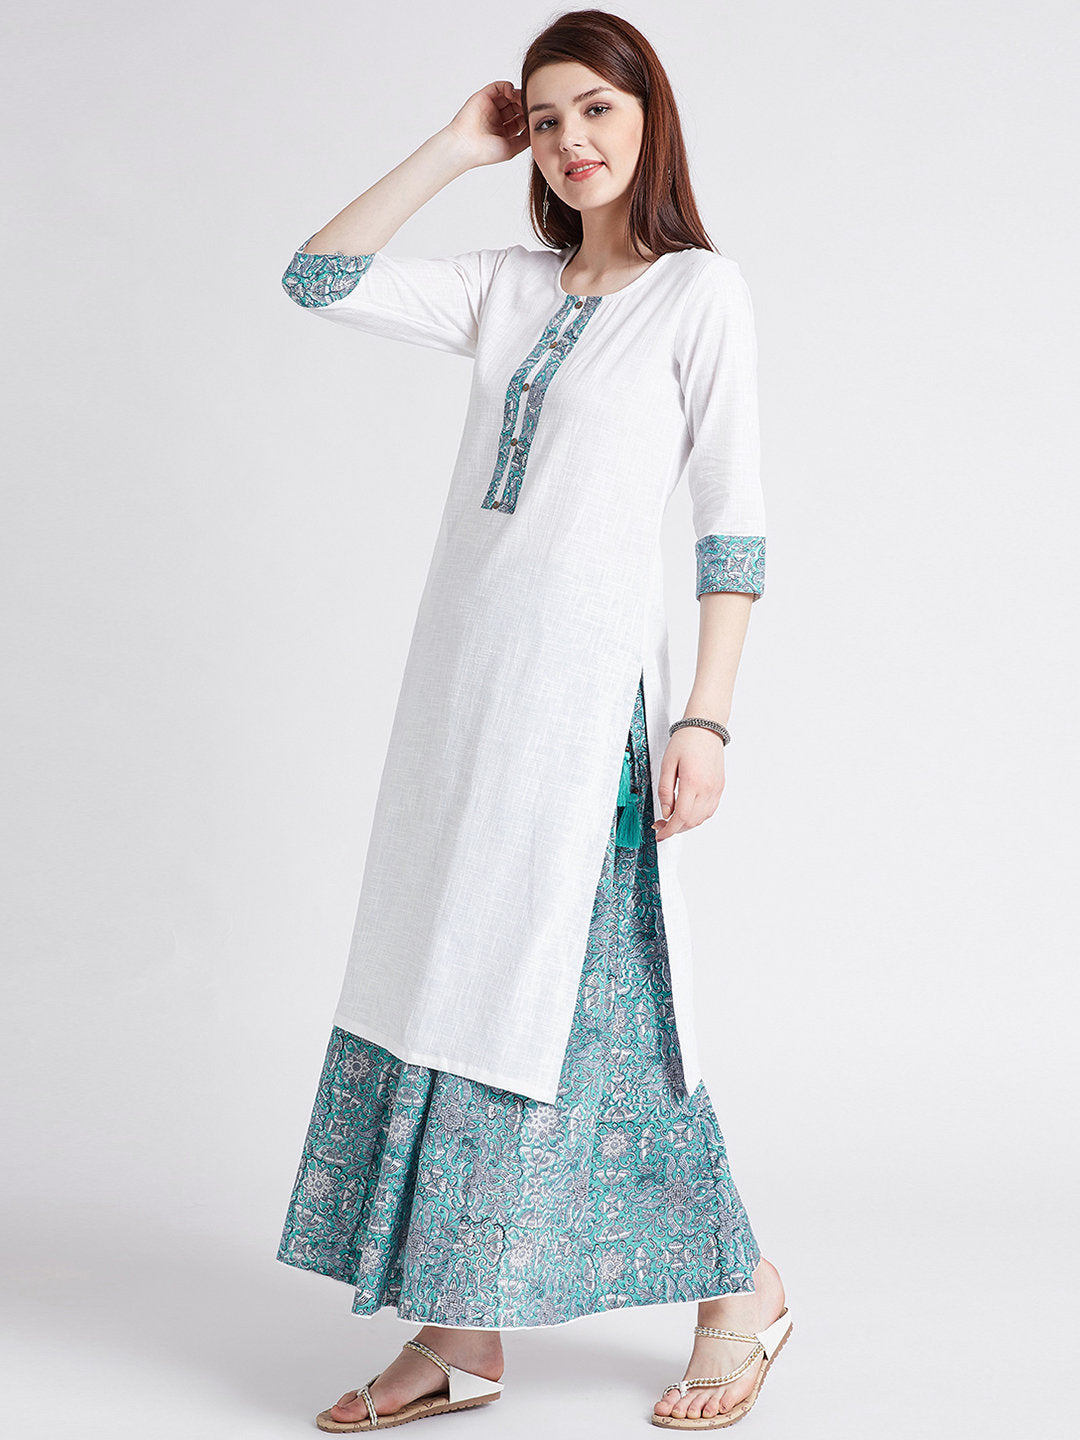 Hand block printed skirt with white long cotton kurta with detailing on neck, sleeves & slits